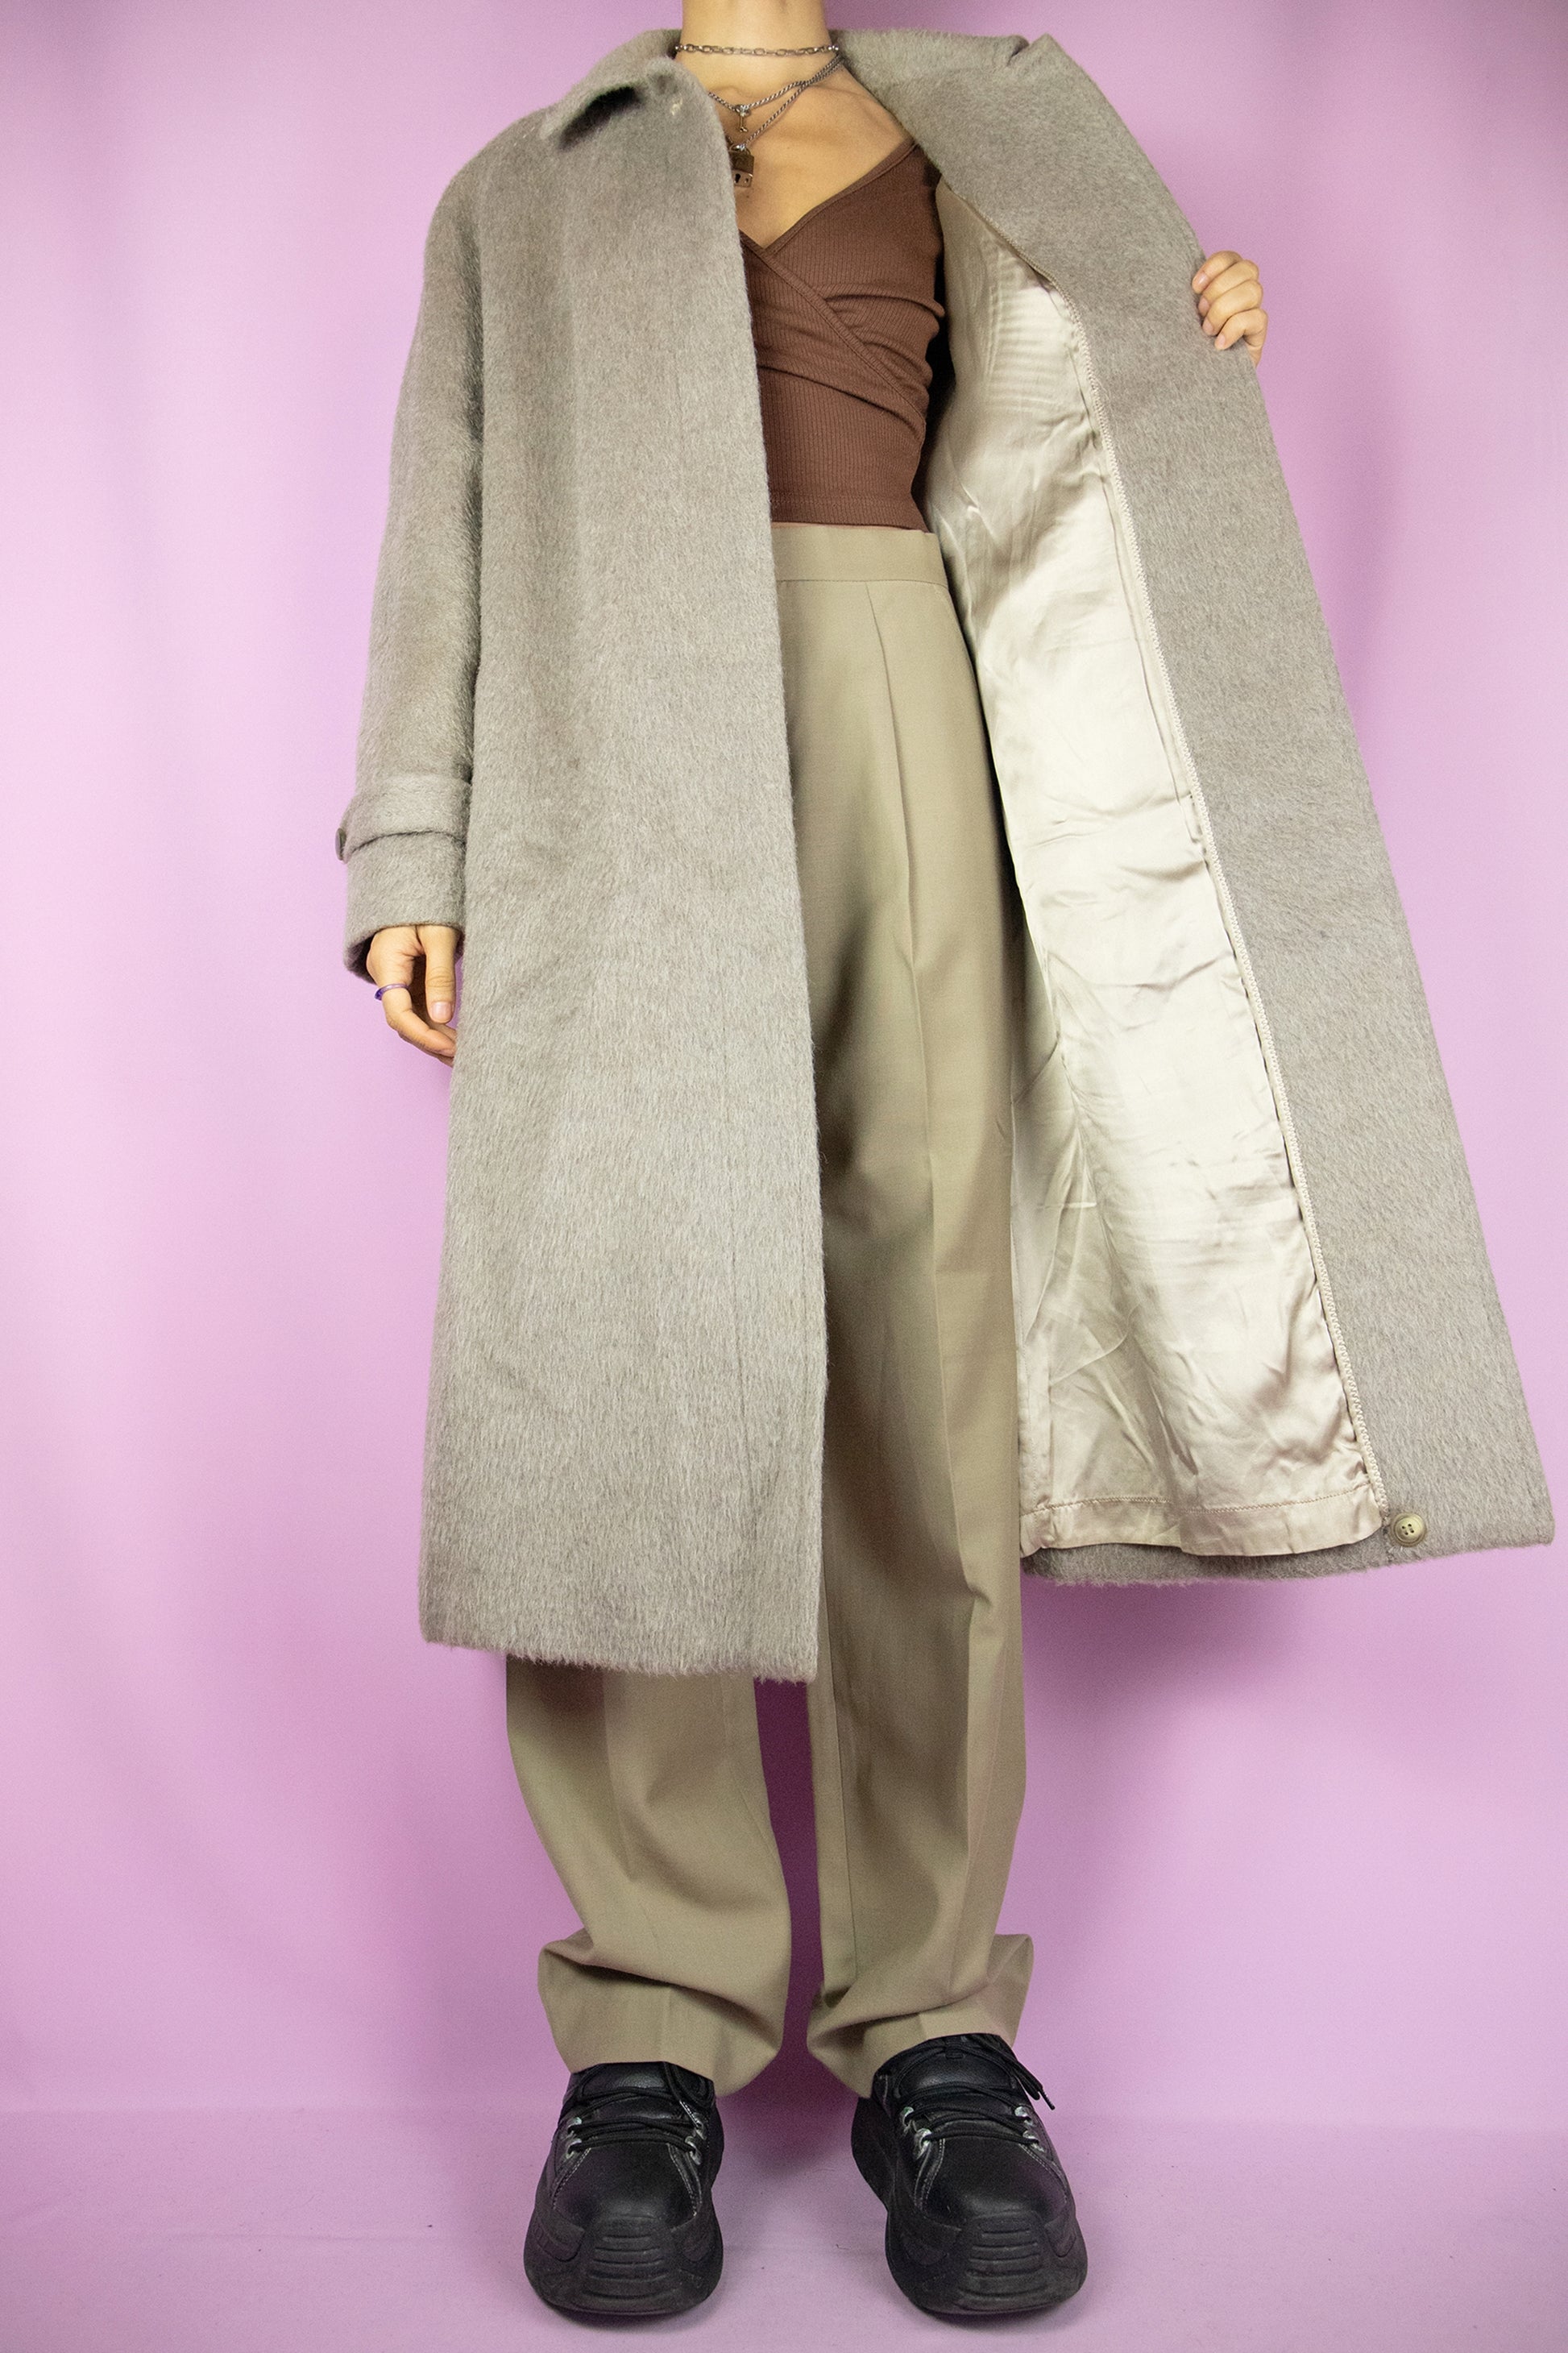 The Vintage 90s Beige Long Wool Coat is a light brown alpaca with merino wool blend maxi jacket with collar, buttons and pockets. Elegant classic retro 1990s winter statement coat.